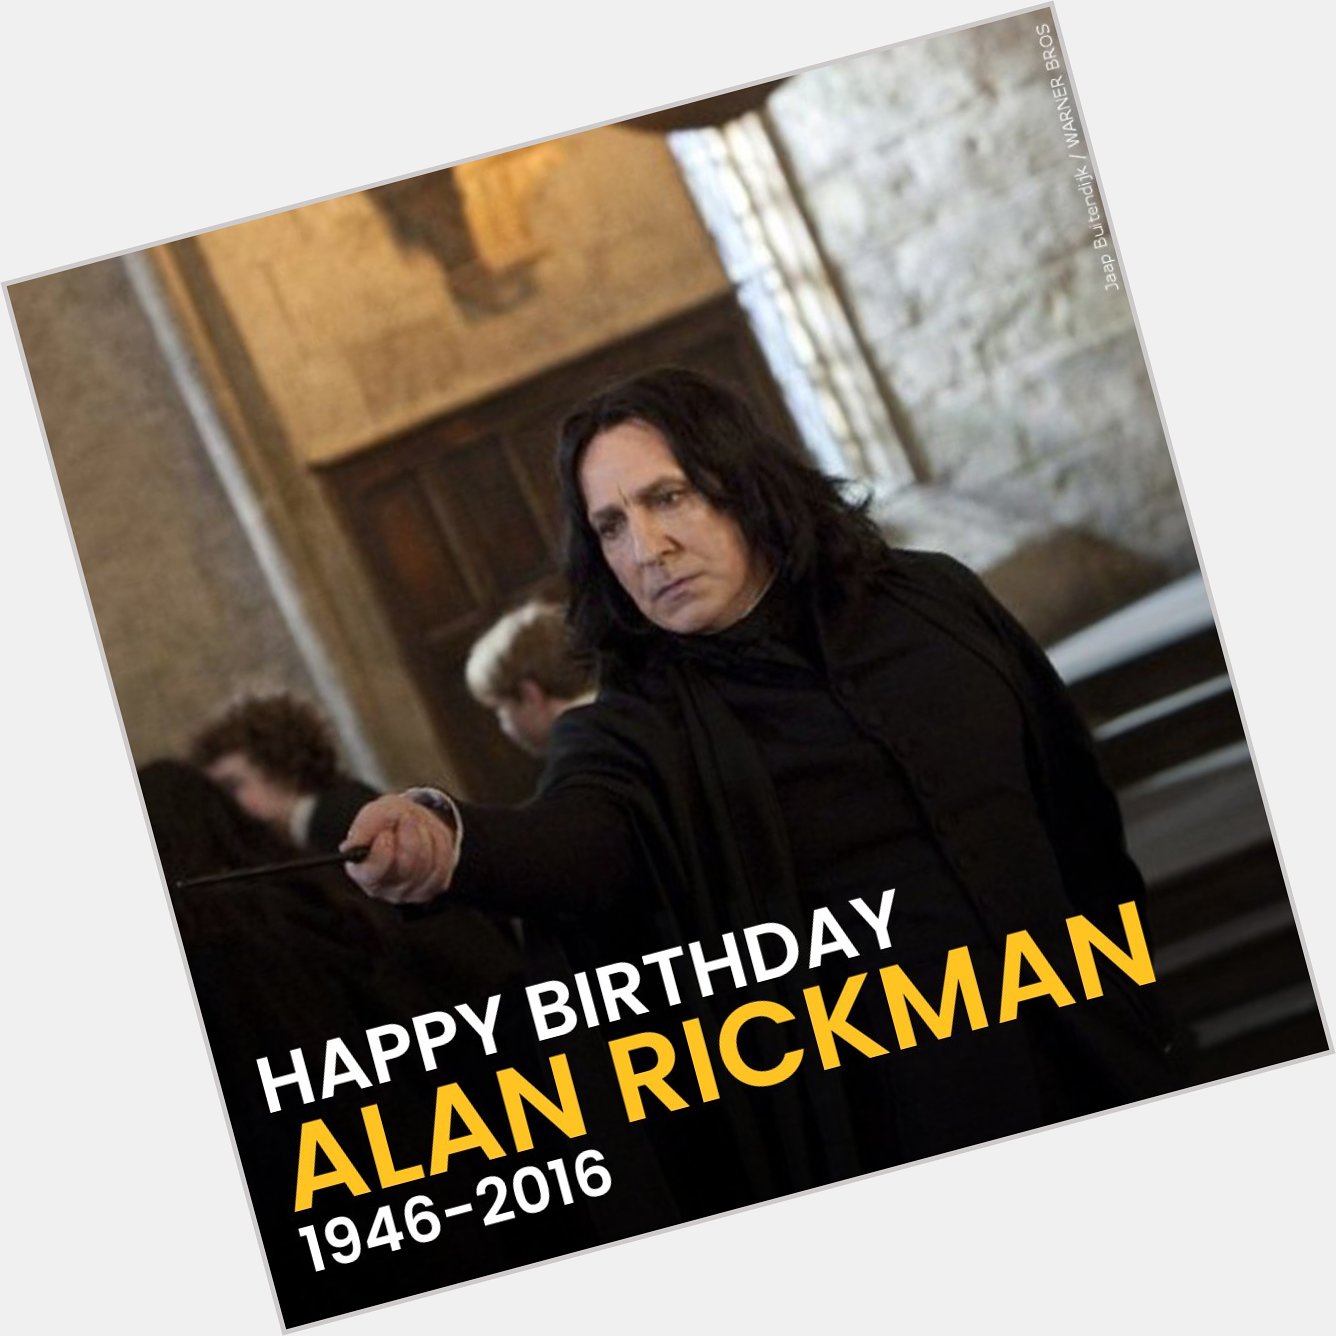 Happy Birthday Sir Alan Rickman! What is your favorite role of the legendary actor? 